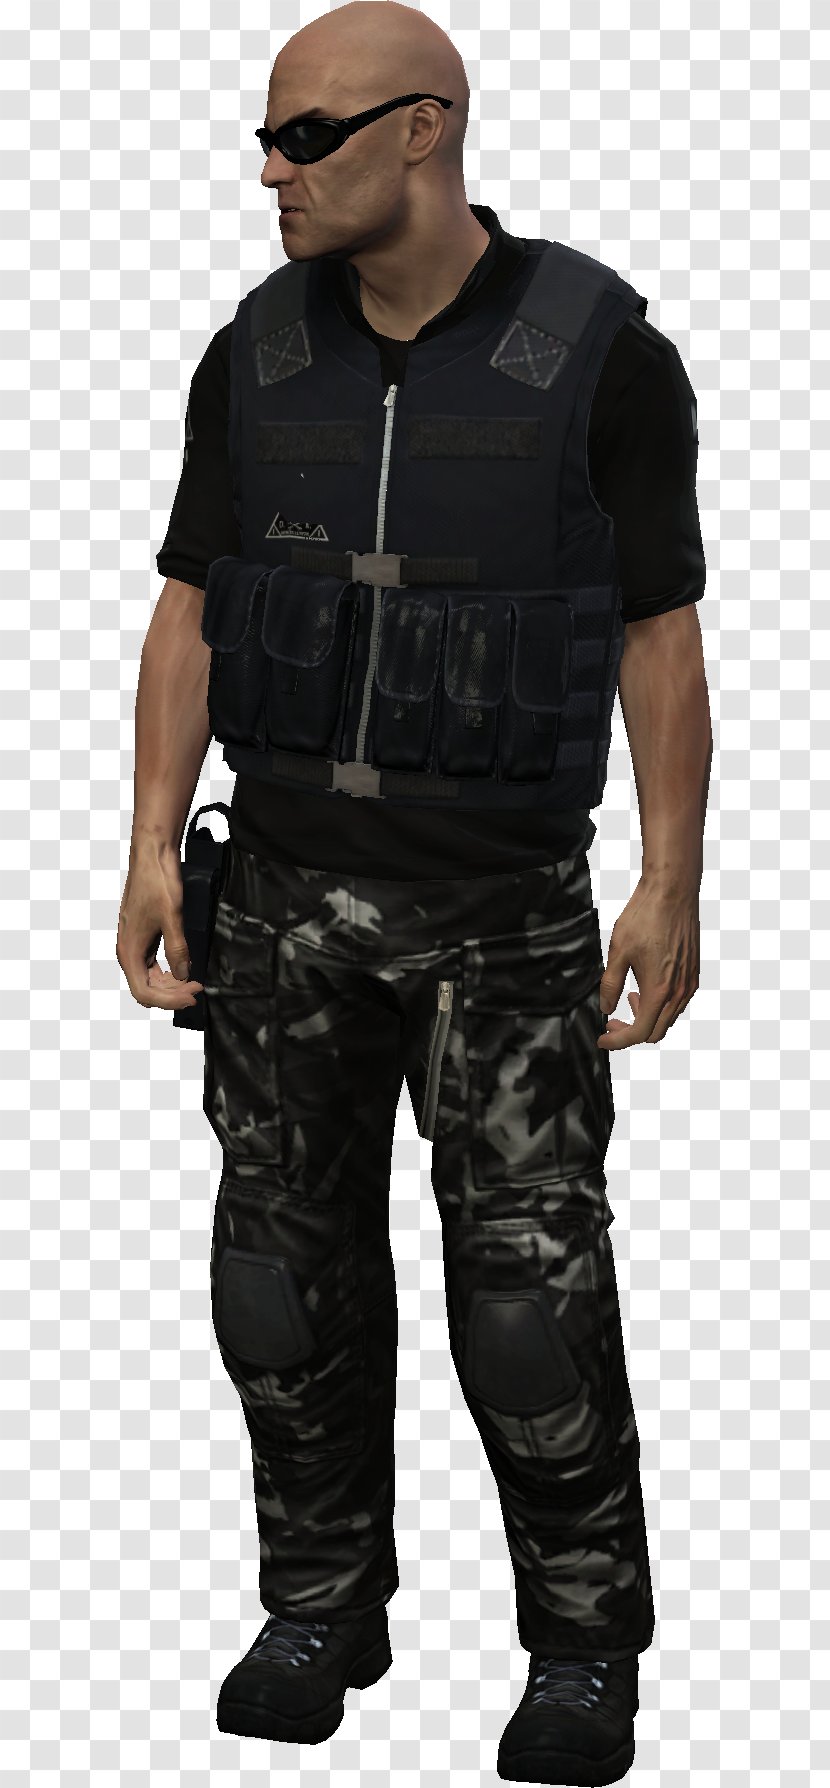 Hitman: Absolution Soldier Wikia Military - Game - Soldiers Transparent PNG